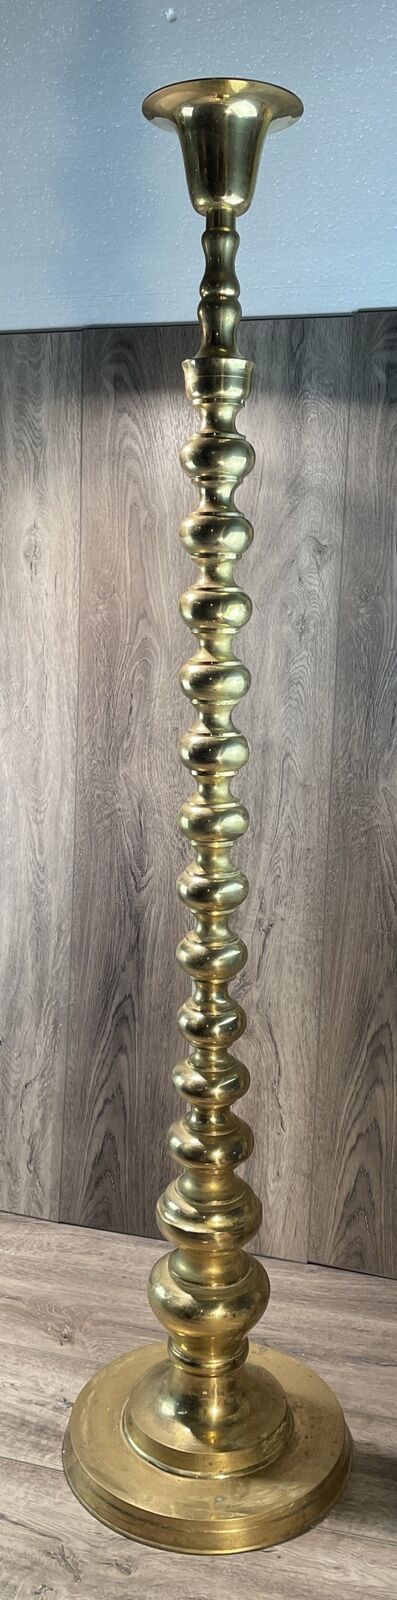 Giant Homco Japan Brass Candlestick Holder 52” Tall Vintage Candle Rare